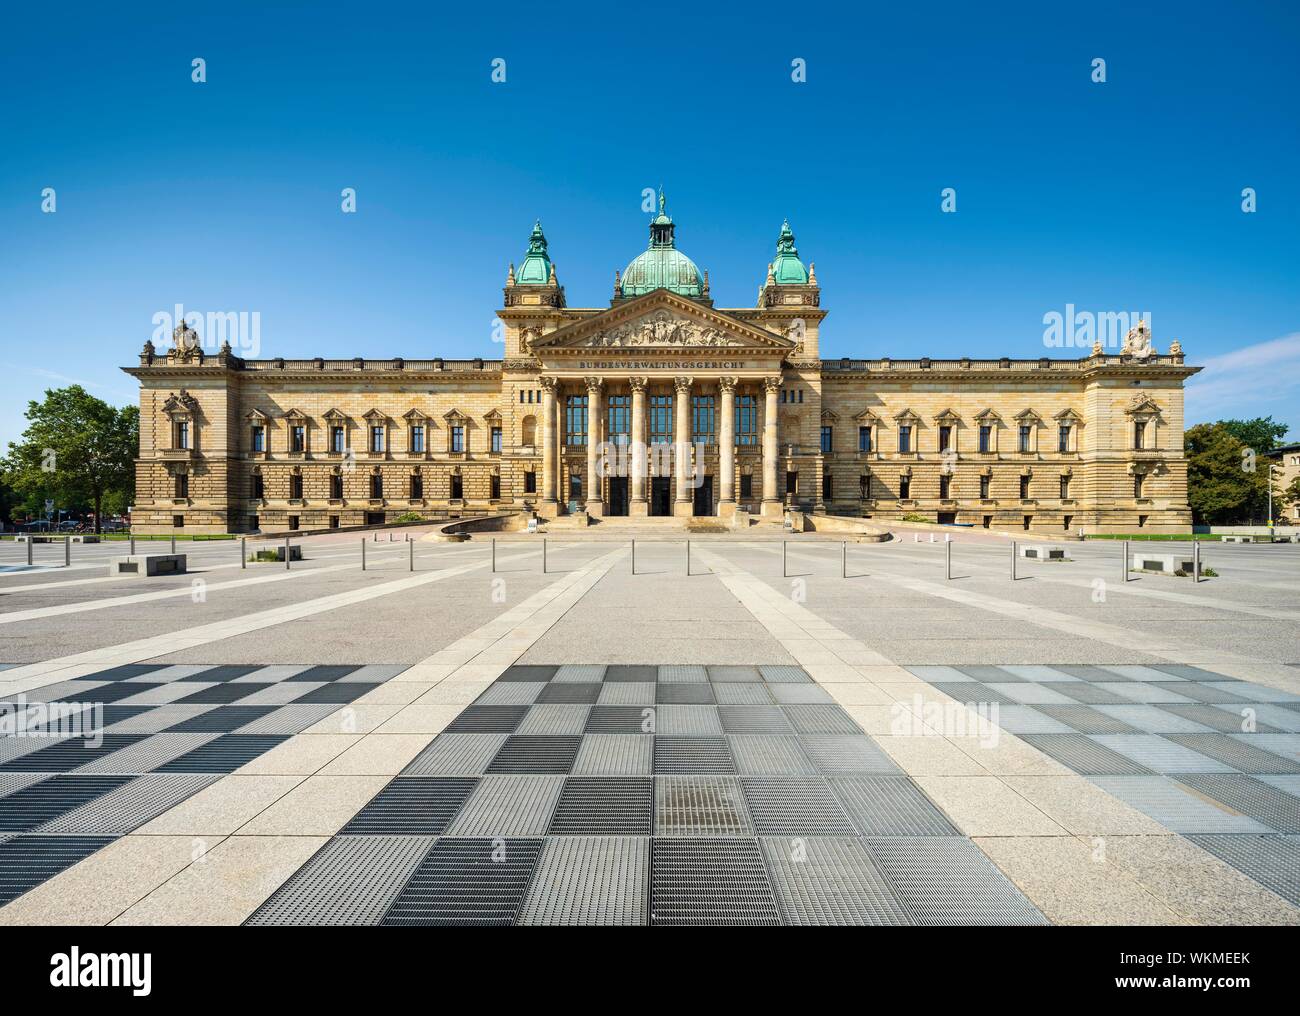 Federal Administrative Court of Germany, former Supreme Court of the German Reich, Leipzig, Saxony, Germany Stock Photo